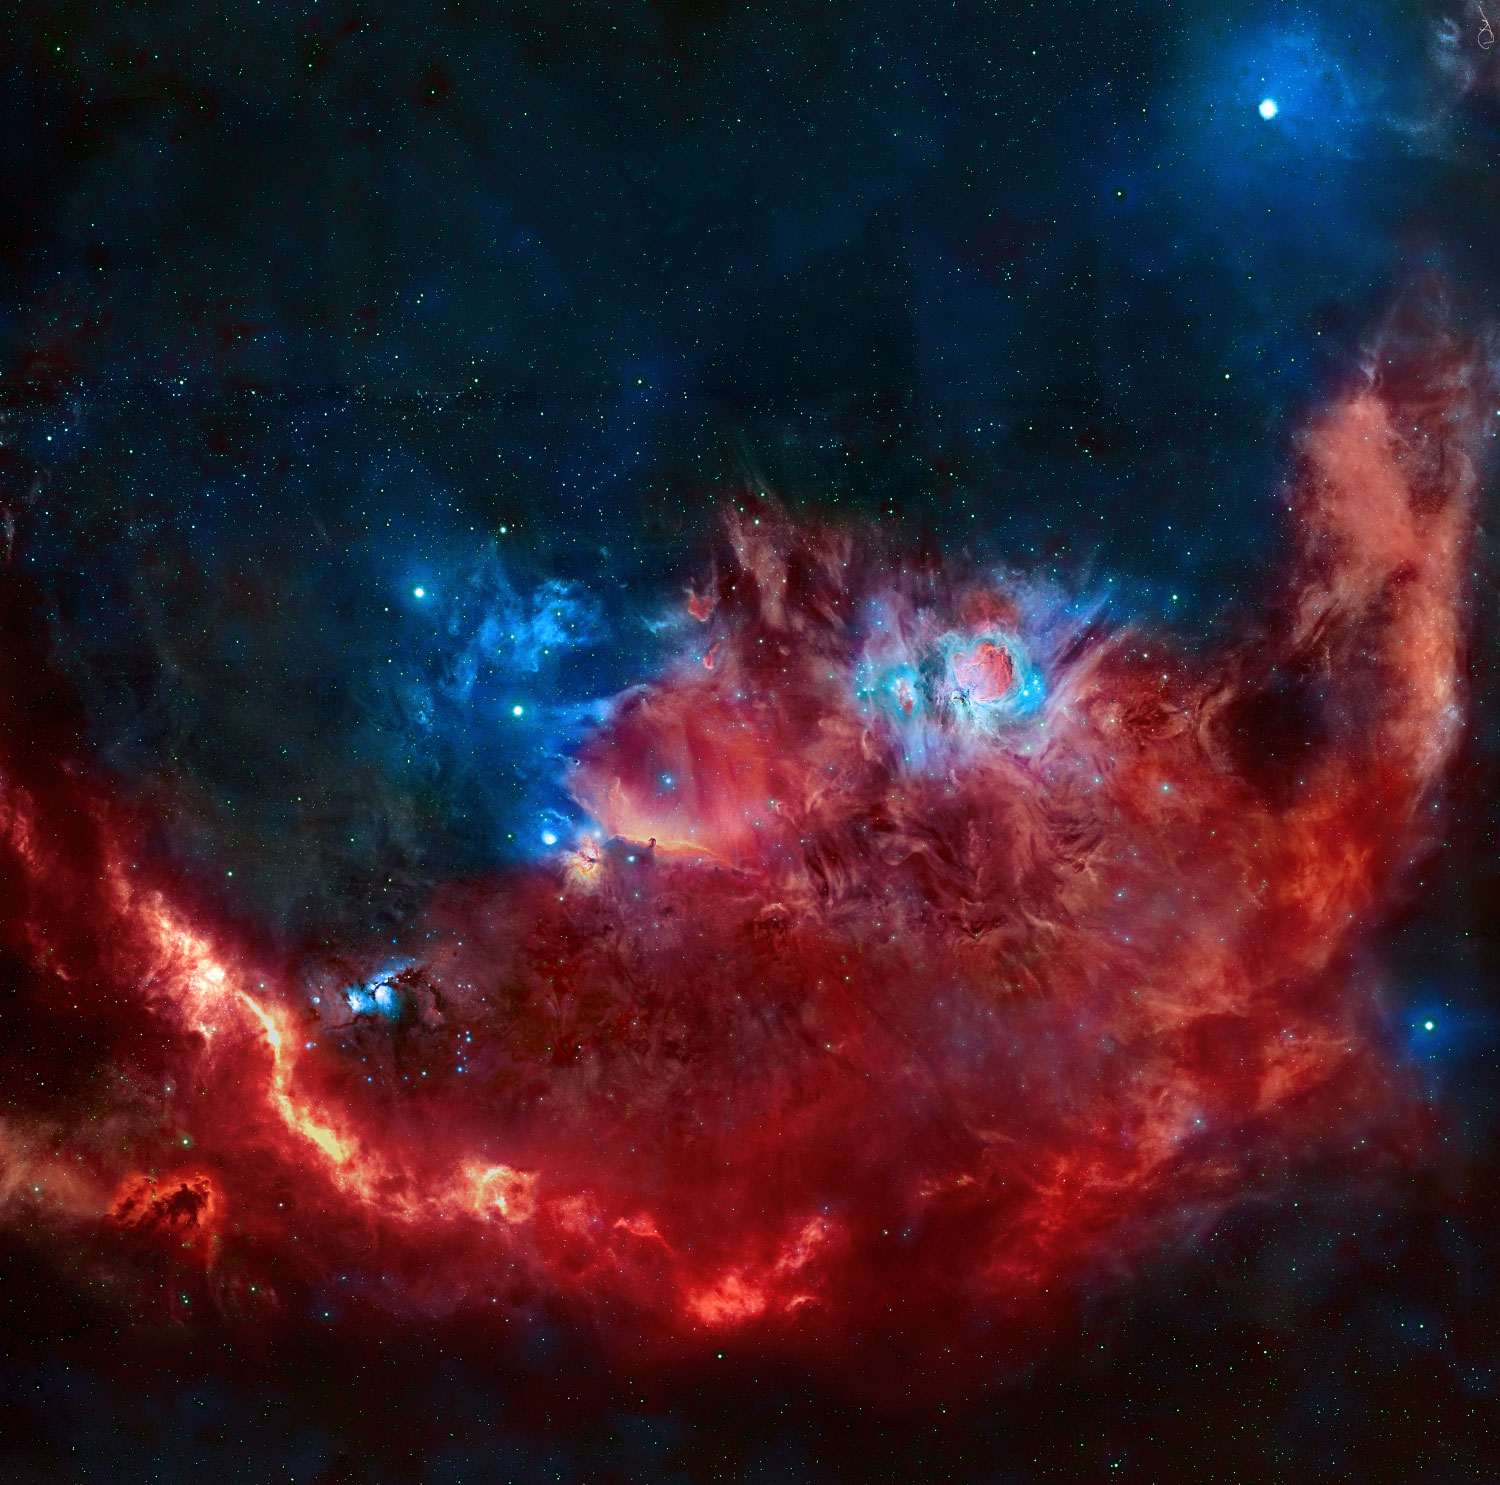 APOD: 2016 April 13 - Orion in Red and Blue